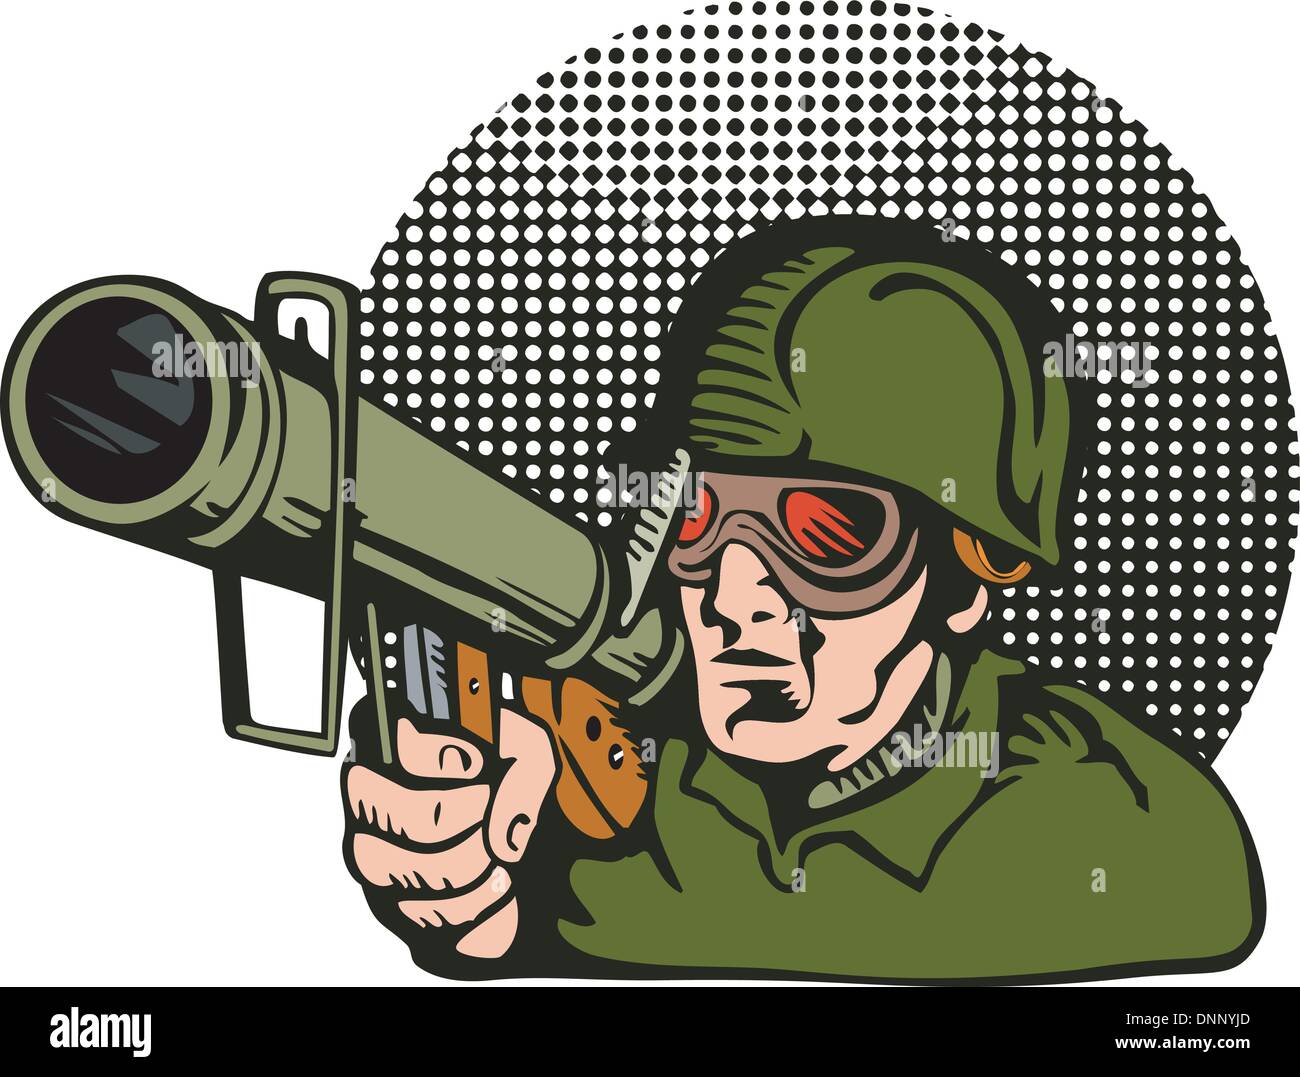 Illustration of soldier aiming a bazooka shooting done in retro style. Stock Vector